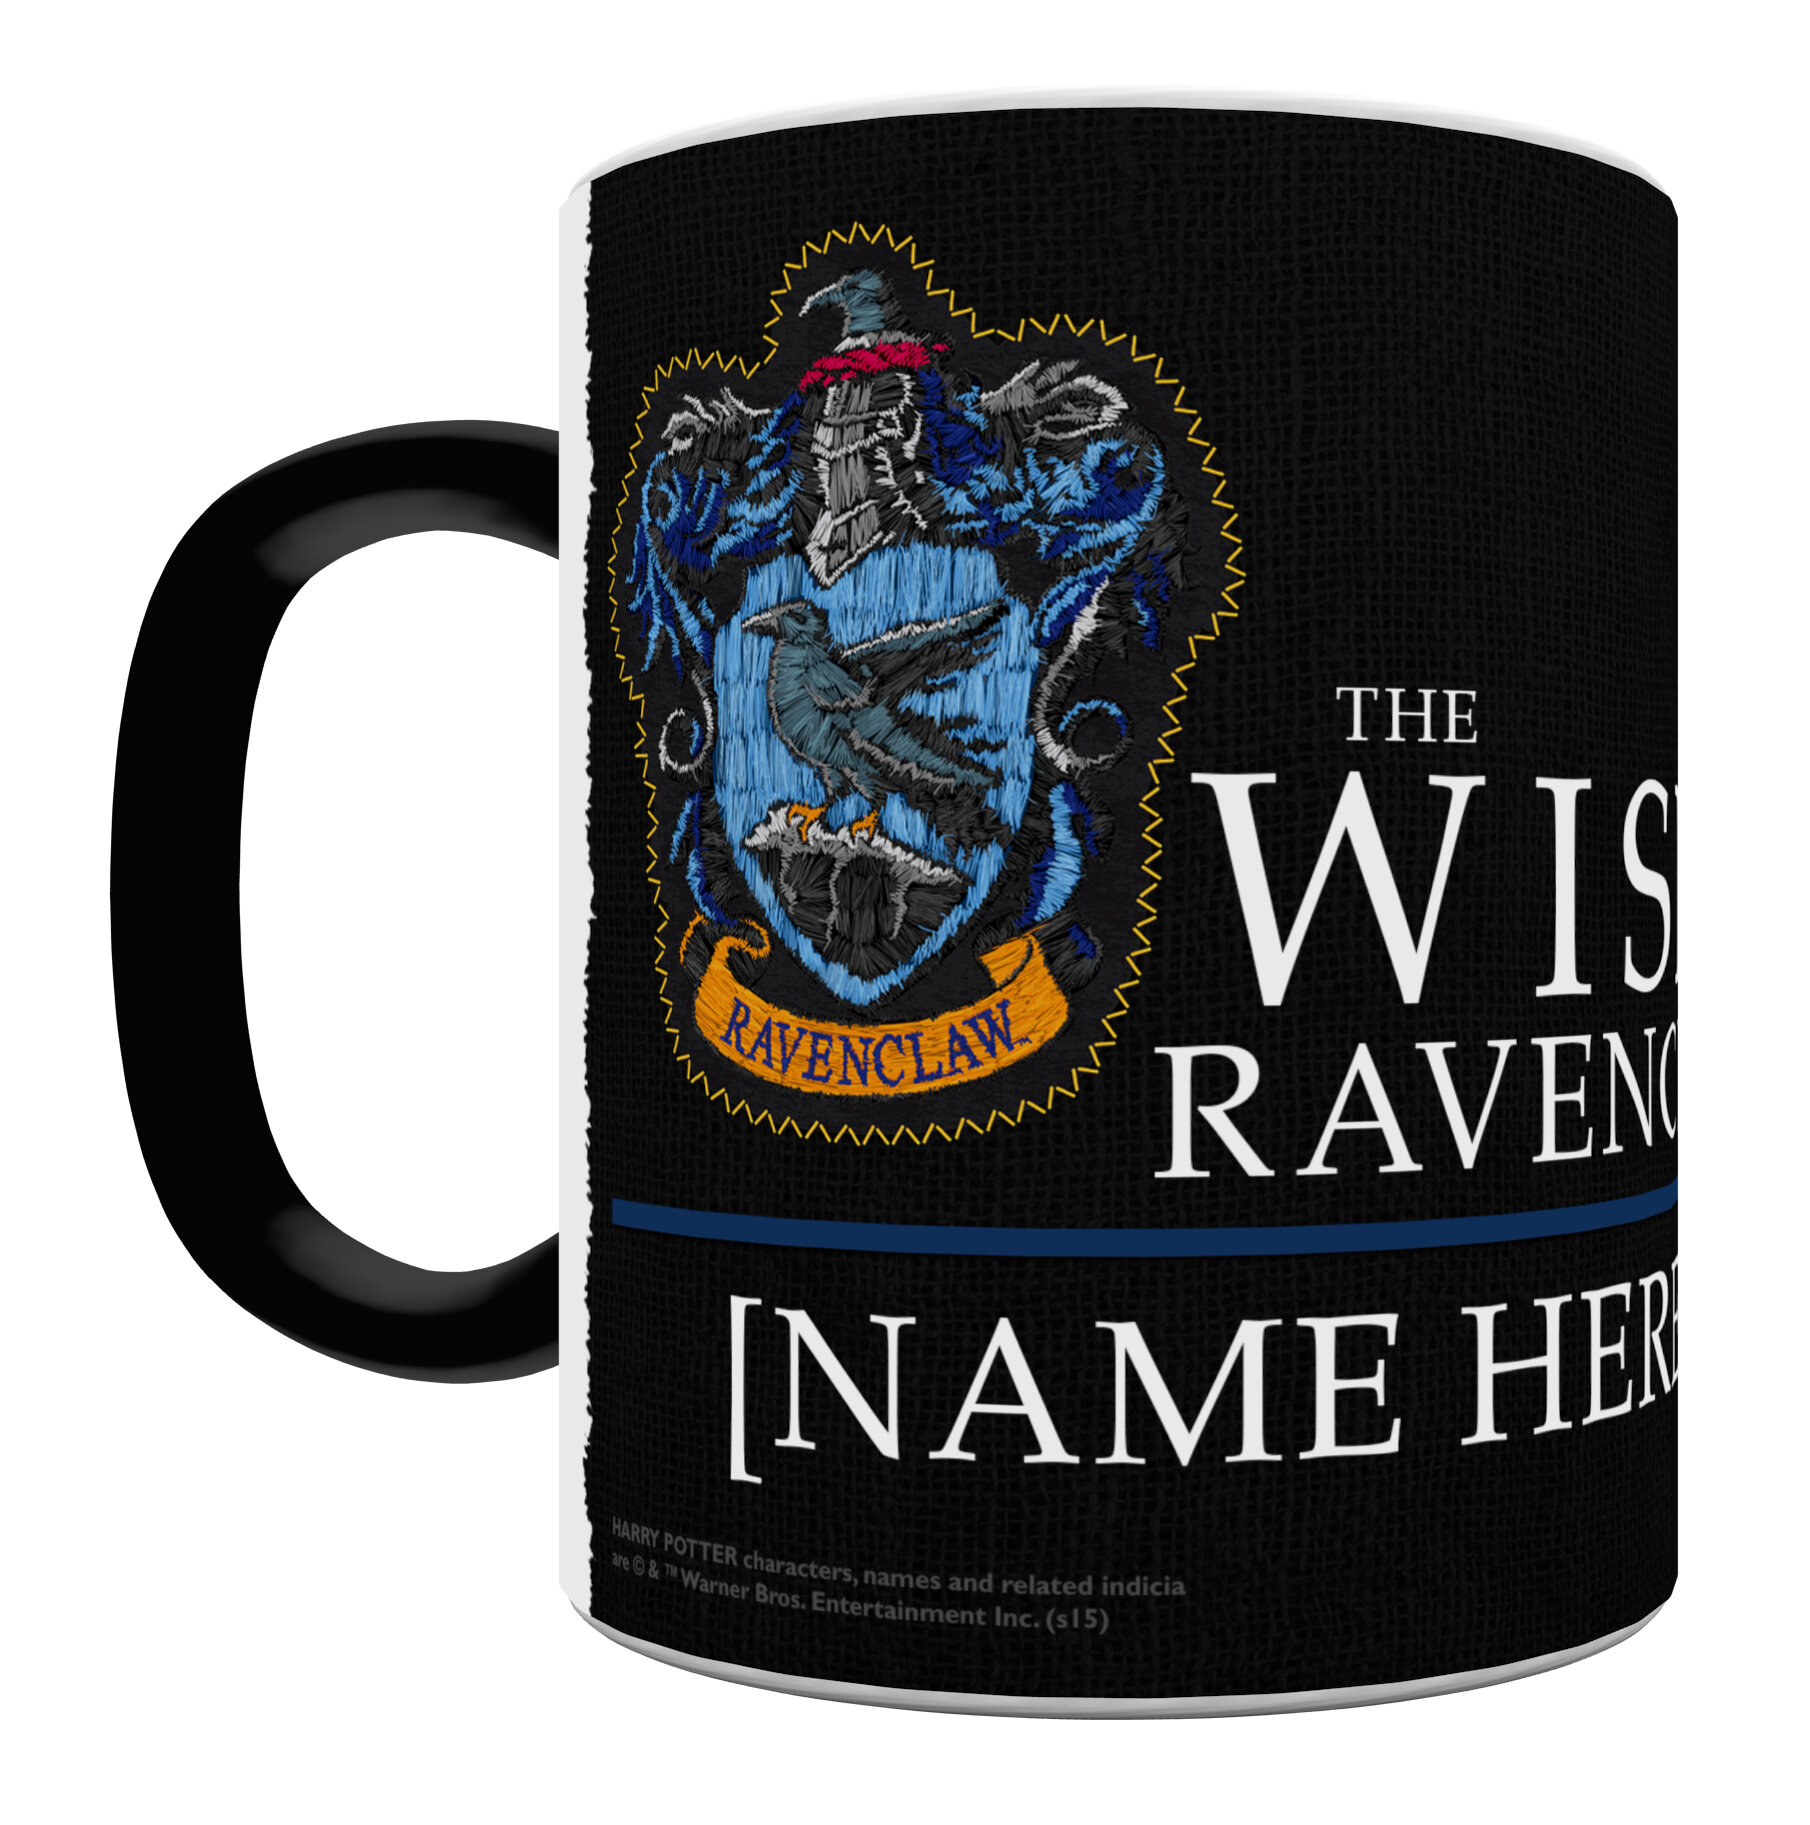 OFFICIAL HARRY POTTER RAVENCLAW CREST OFFICIAL MUG COFFEE CUP NEW GIFT BOX